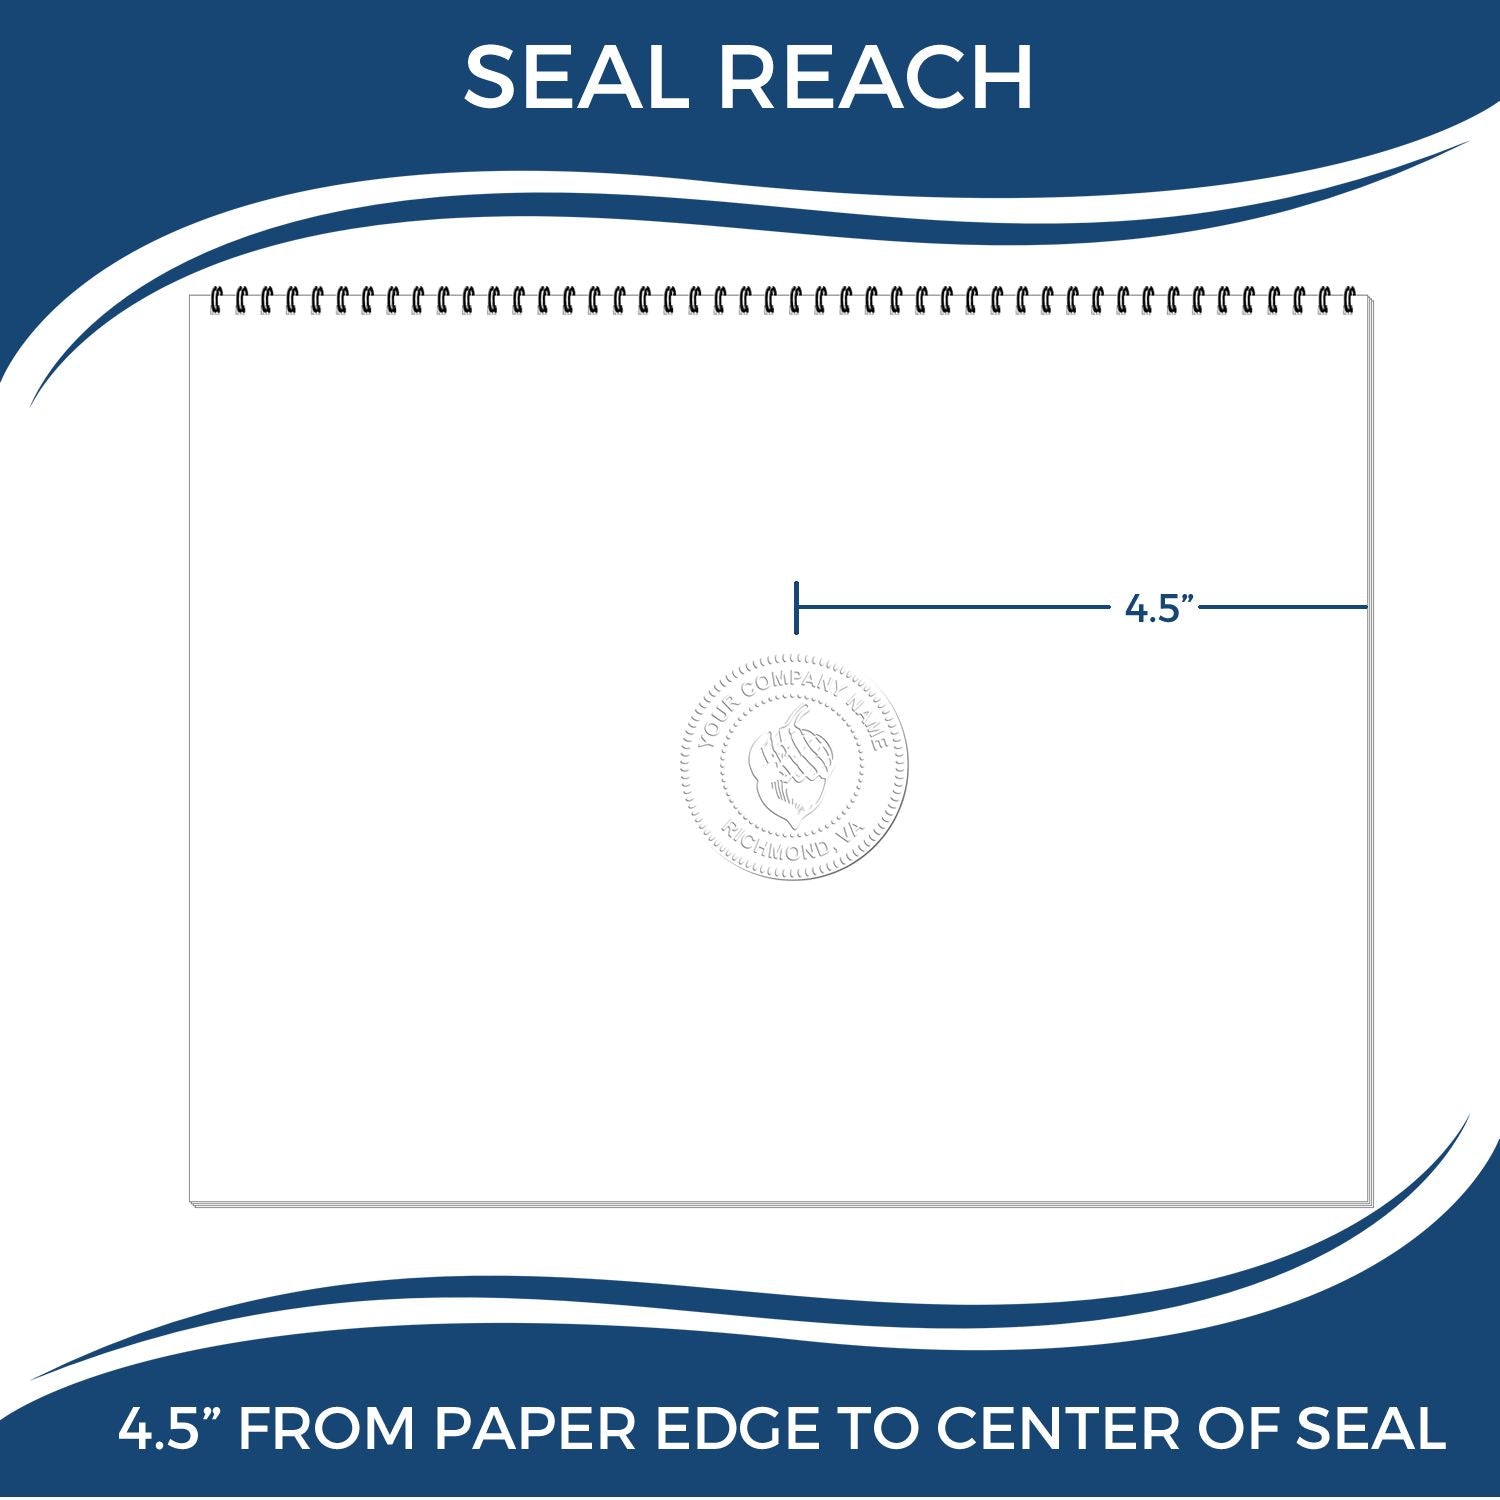 An infographic showing the seal reach which is represented by a ruler and a miniature seal image of the Extended Long Reach New York Surveyor Embosser